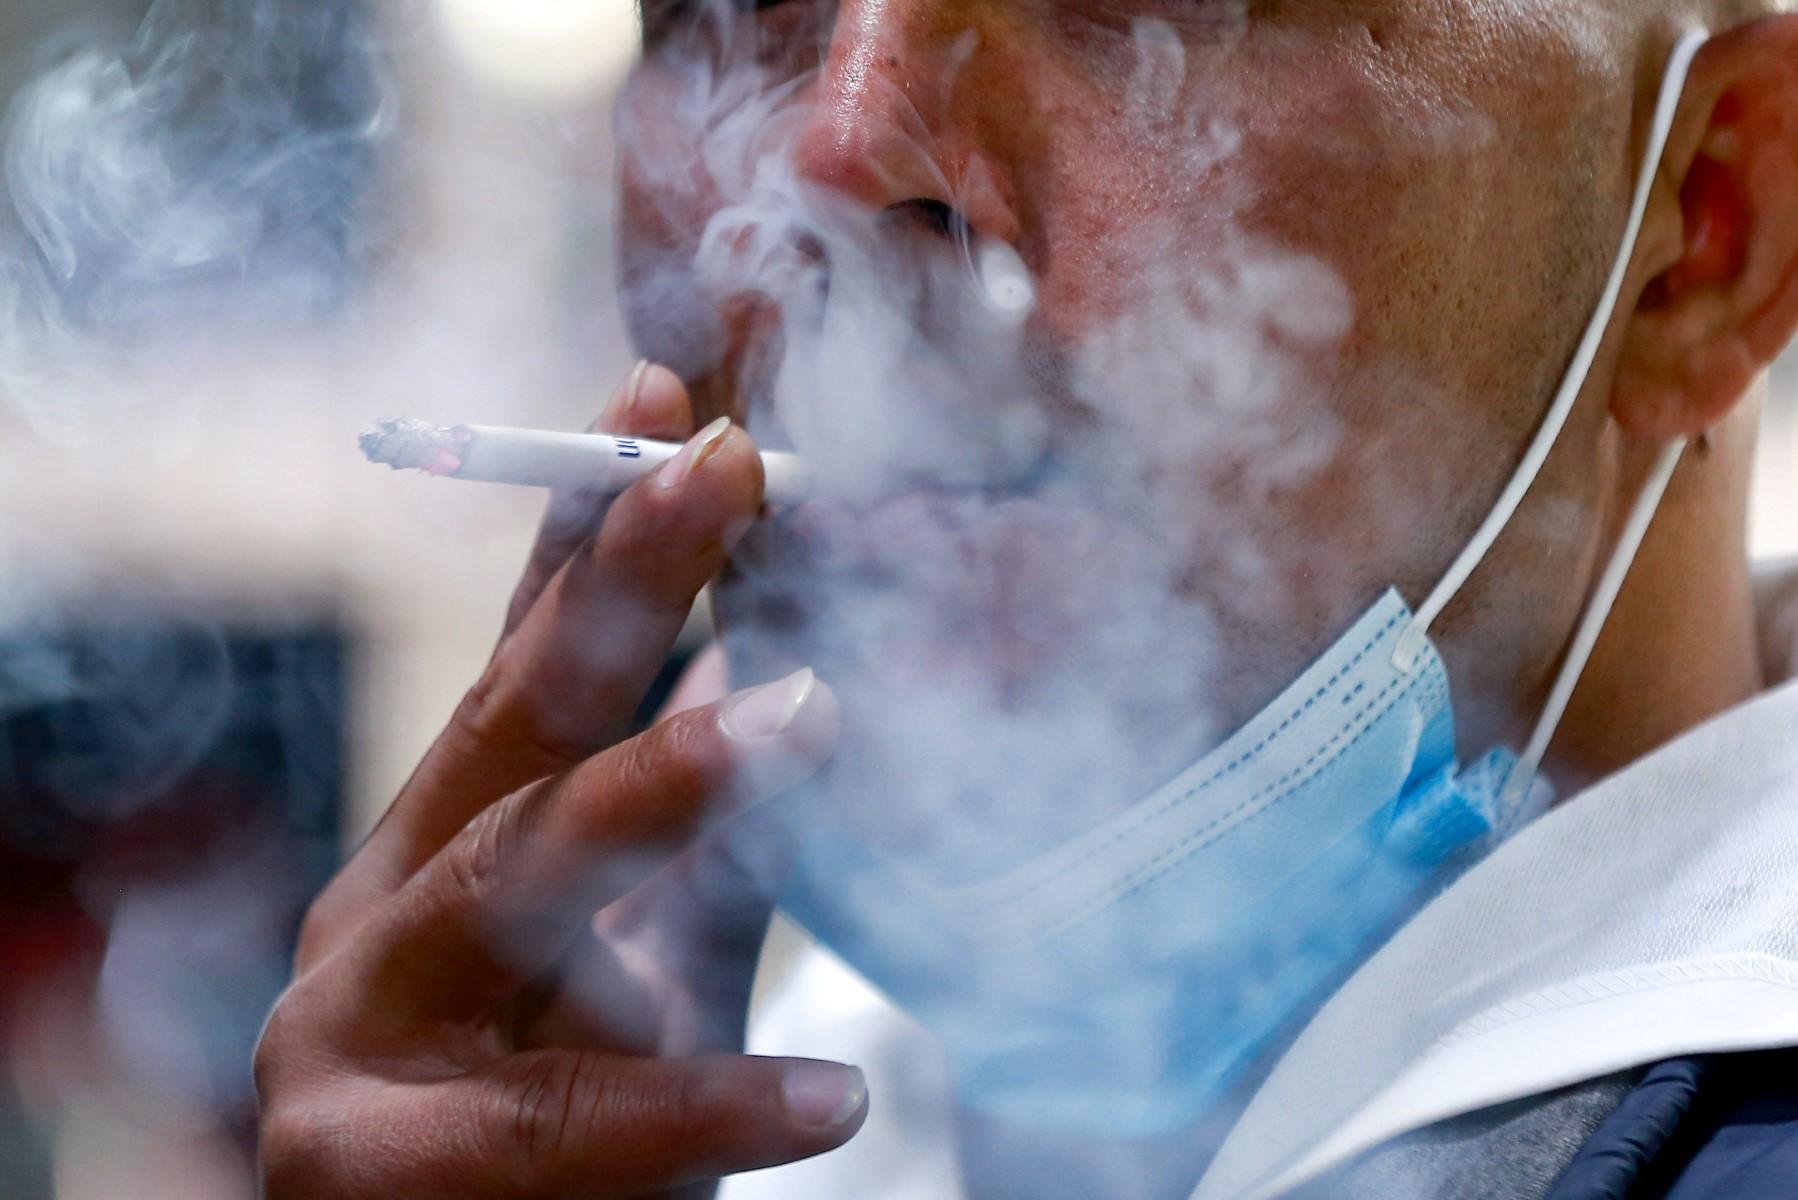 Reducing the nicotine content of cigarettes has been a topic under discussion for years among US authorities. Photo: AFP